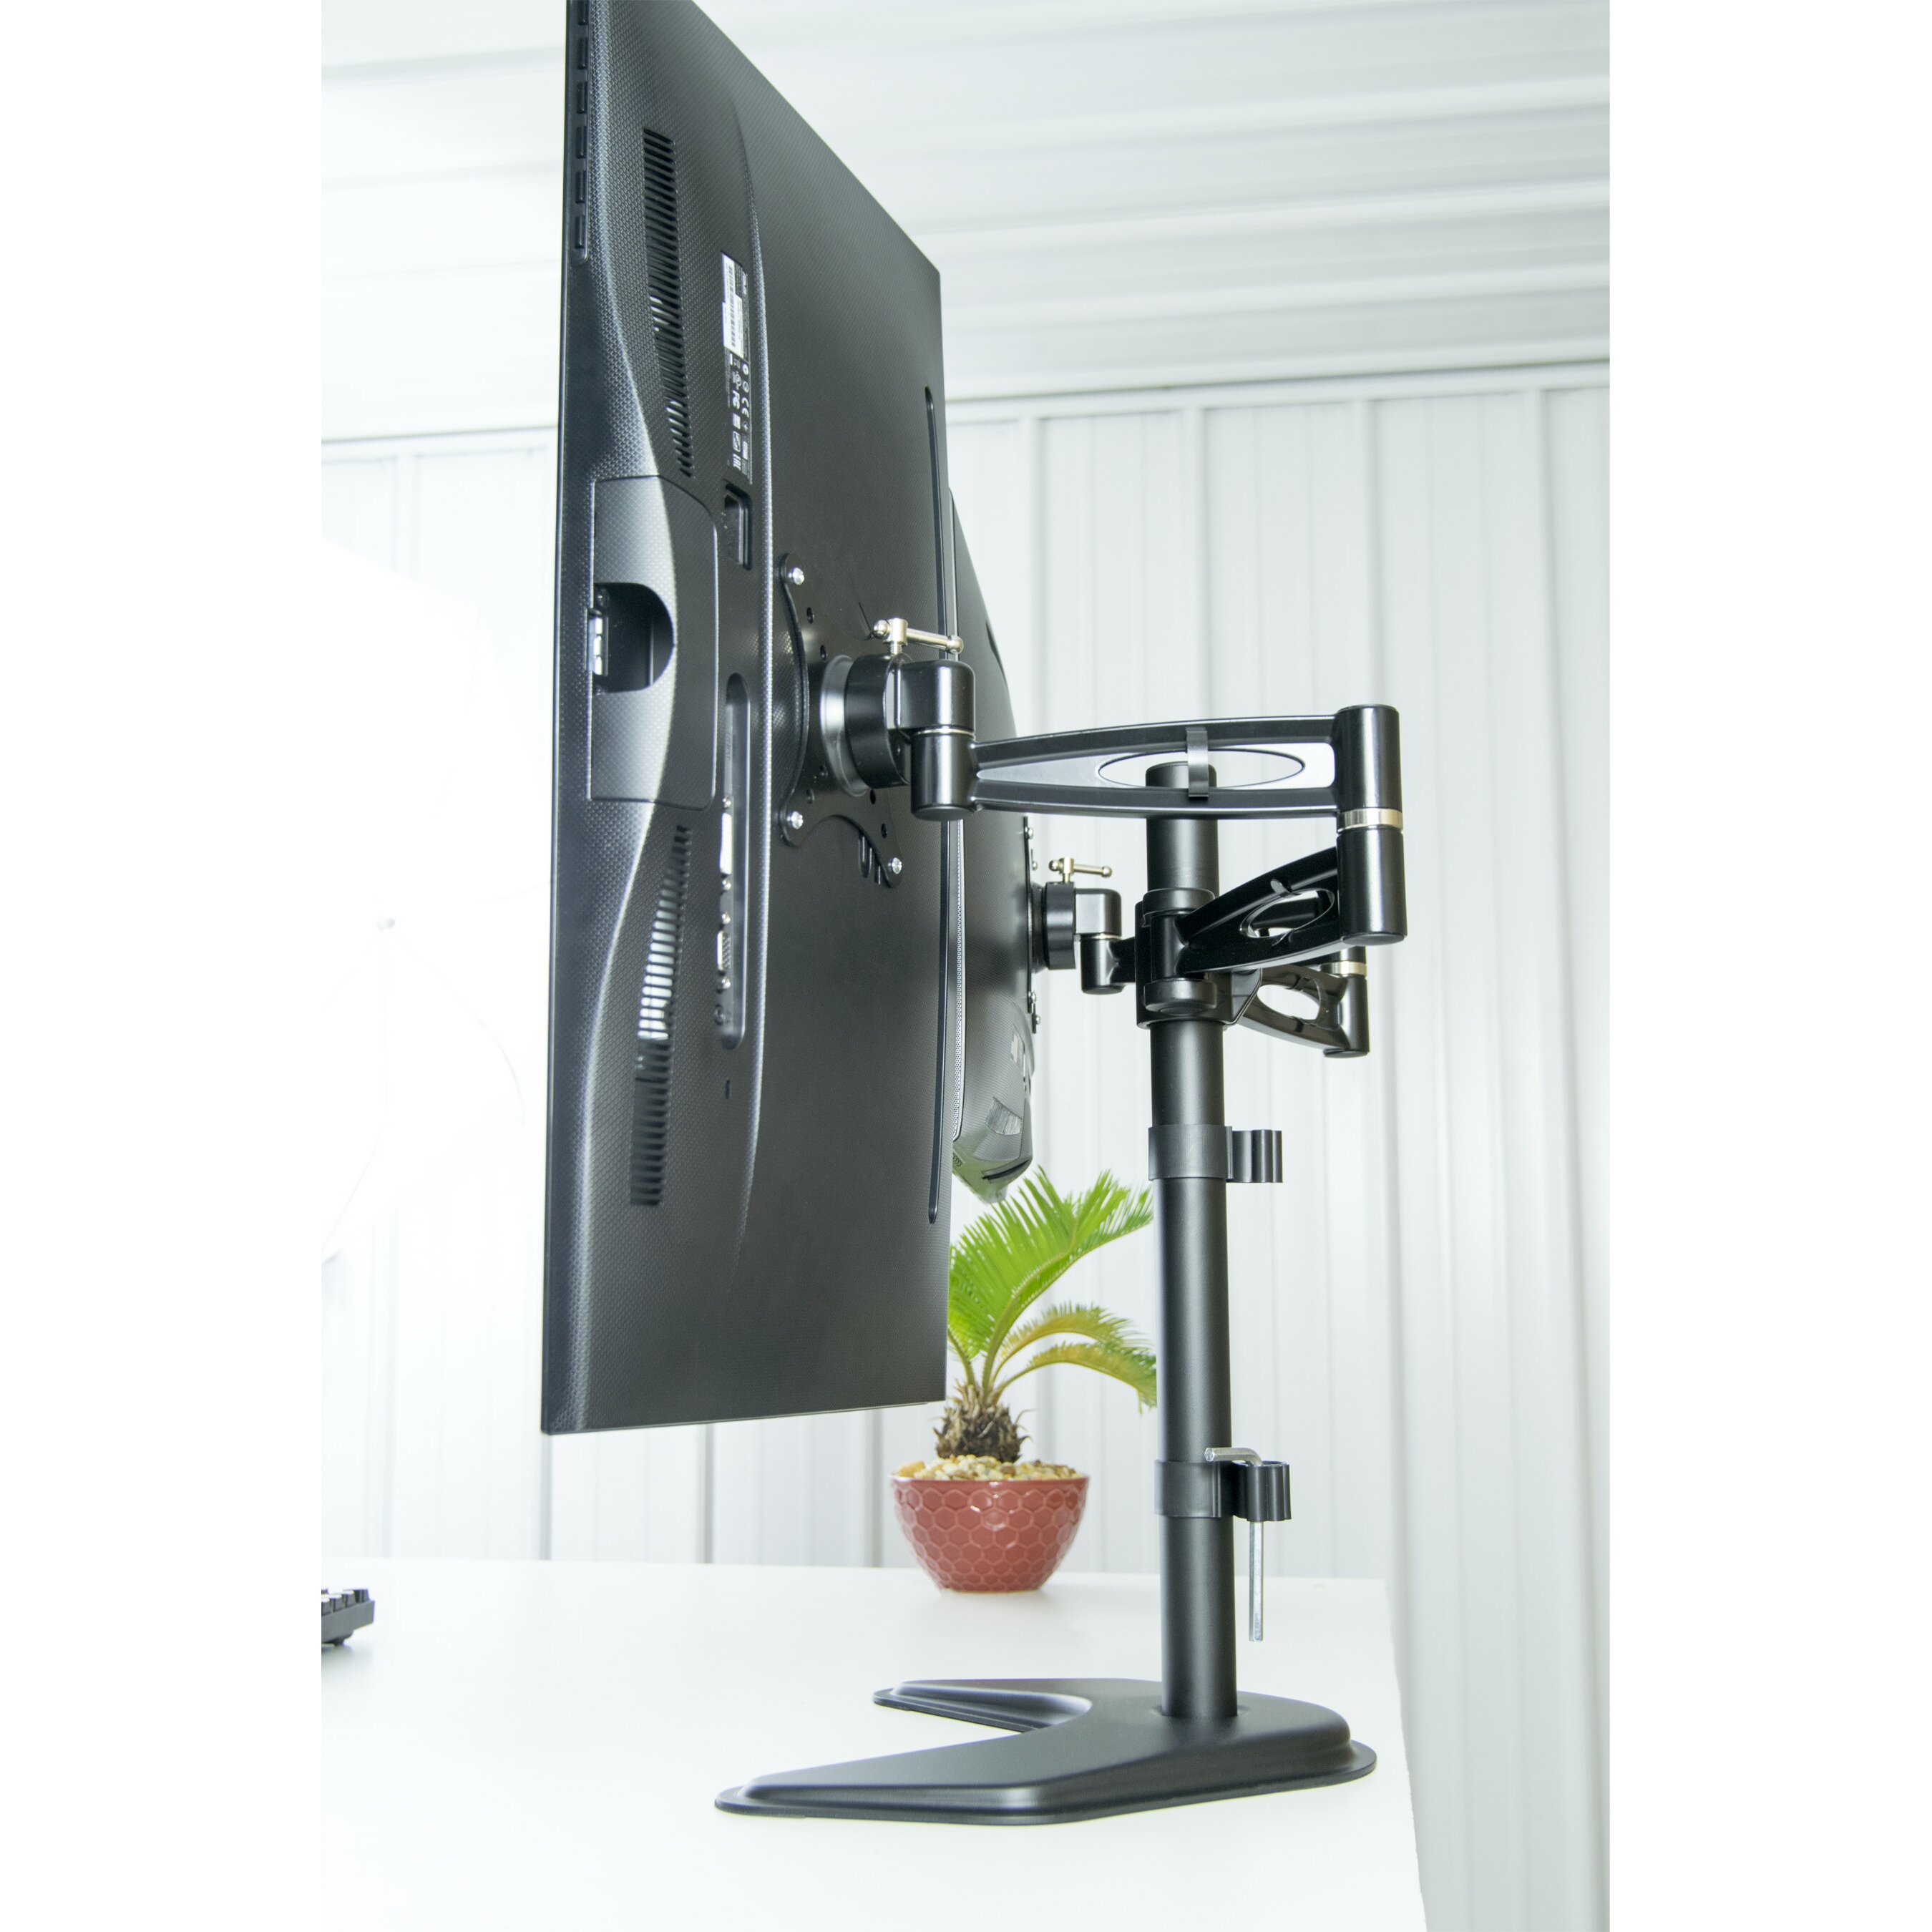 Vivo Dual LCD Monitor Free Standing Height Adjustable 2 Screen Desk Mount STAND V002Z